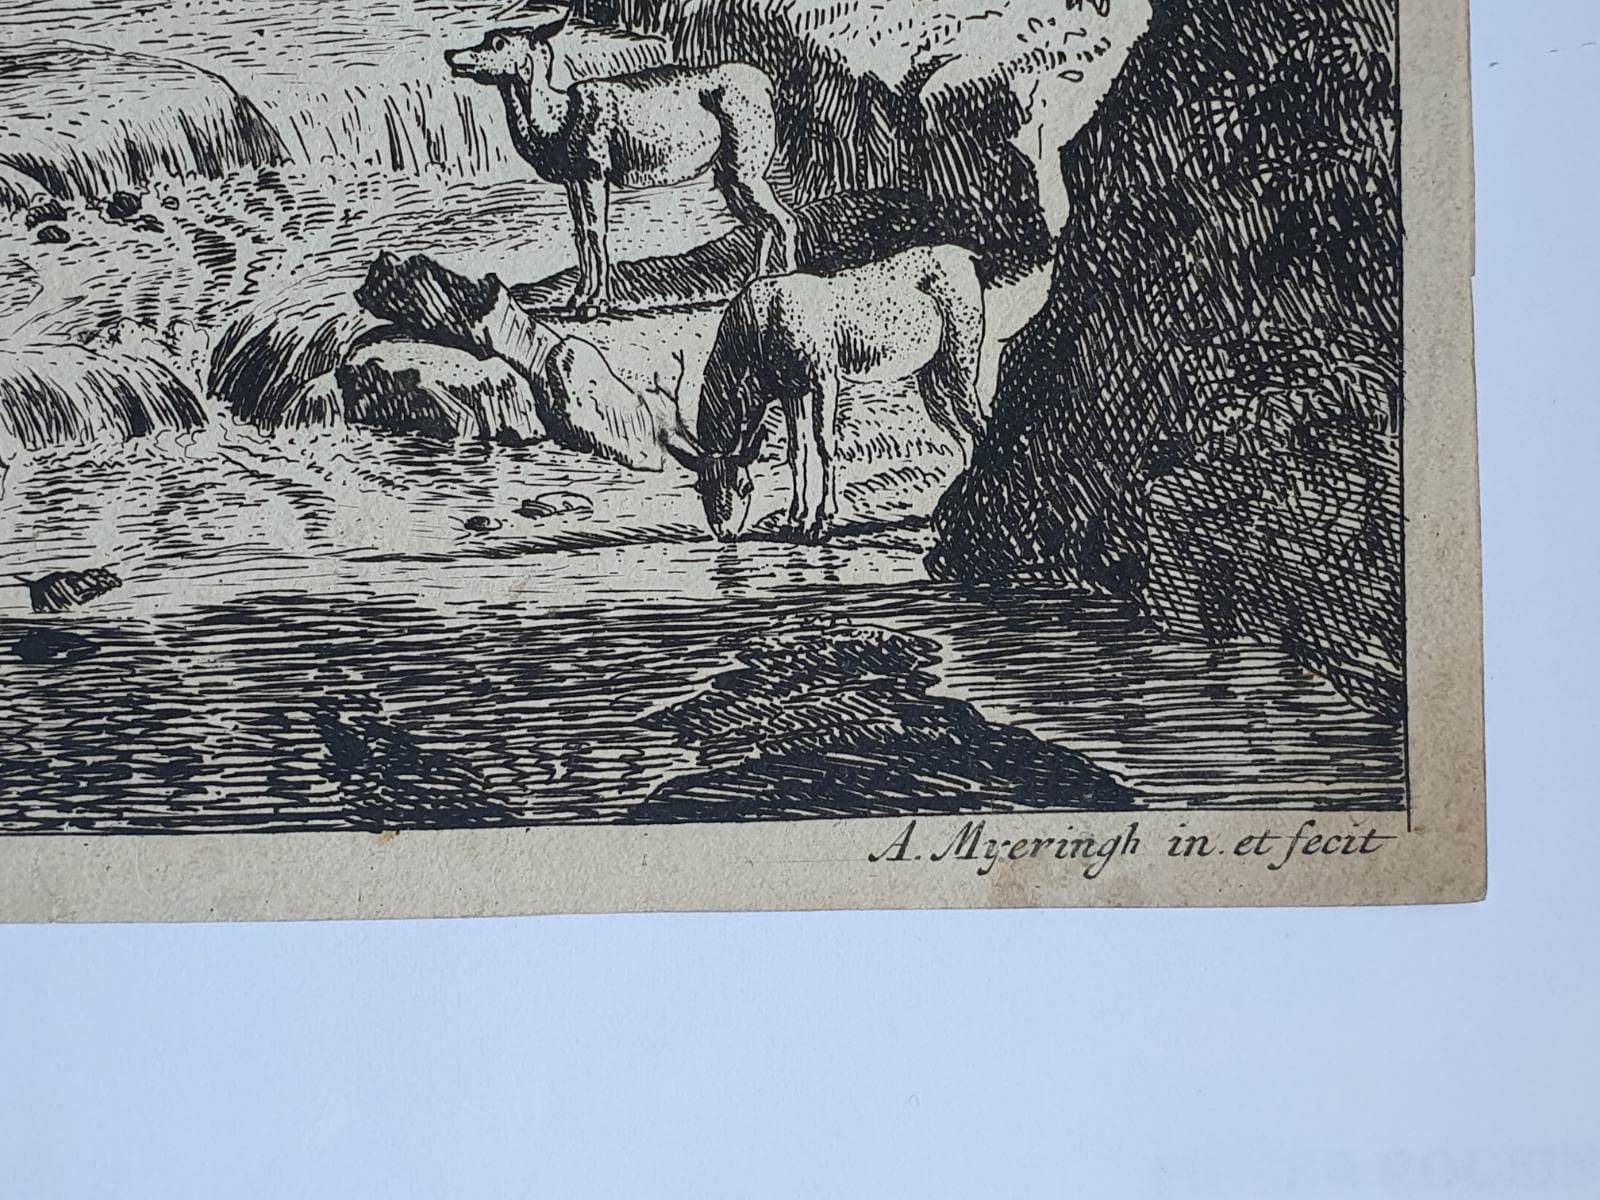 [Antique print, etching/ets] Italian landscape with Pan and Syrinx, published 1650-1700.